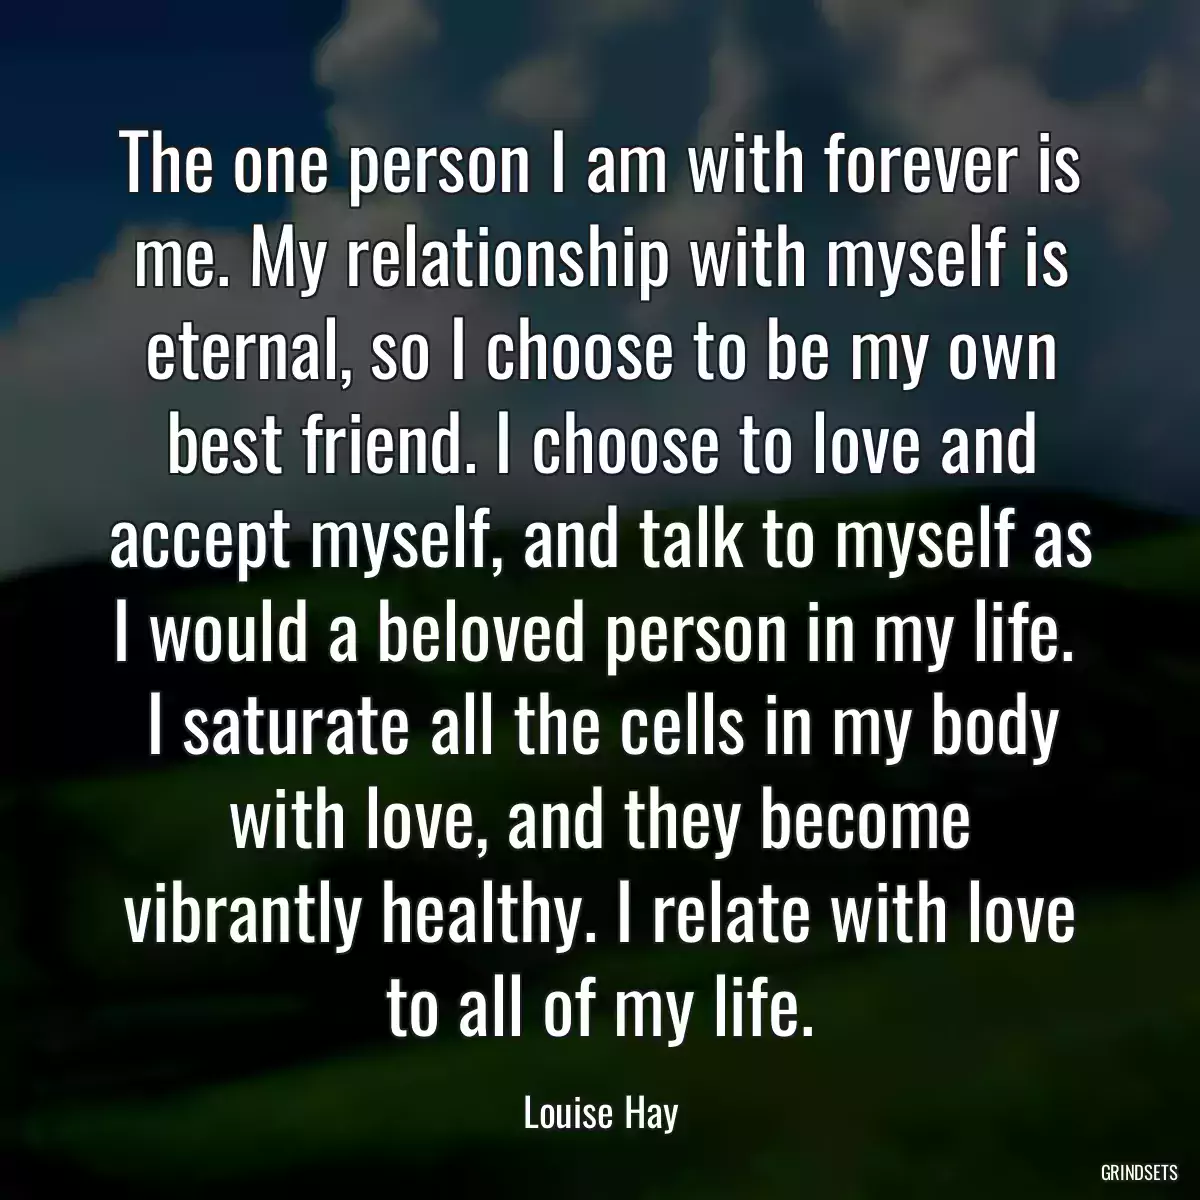 The one person I am with forever is me. My relationship with myself is eternal, so I choose to be my own best friend. I choose to love and accept myself, and talk to myself as I would a beloved person in my life.  I saturate all the cells in my body with love, and they become vibrantly healthy. I relate with love to all of my life.